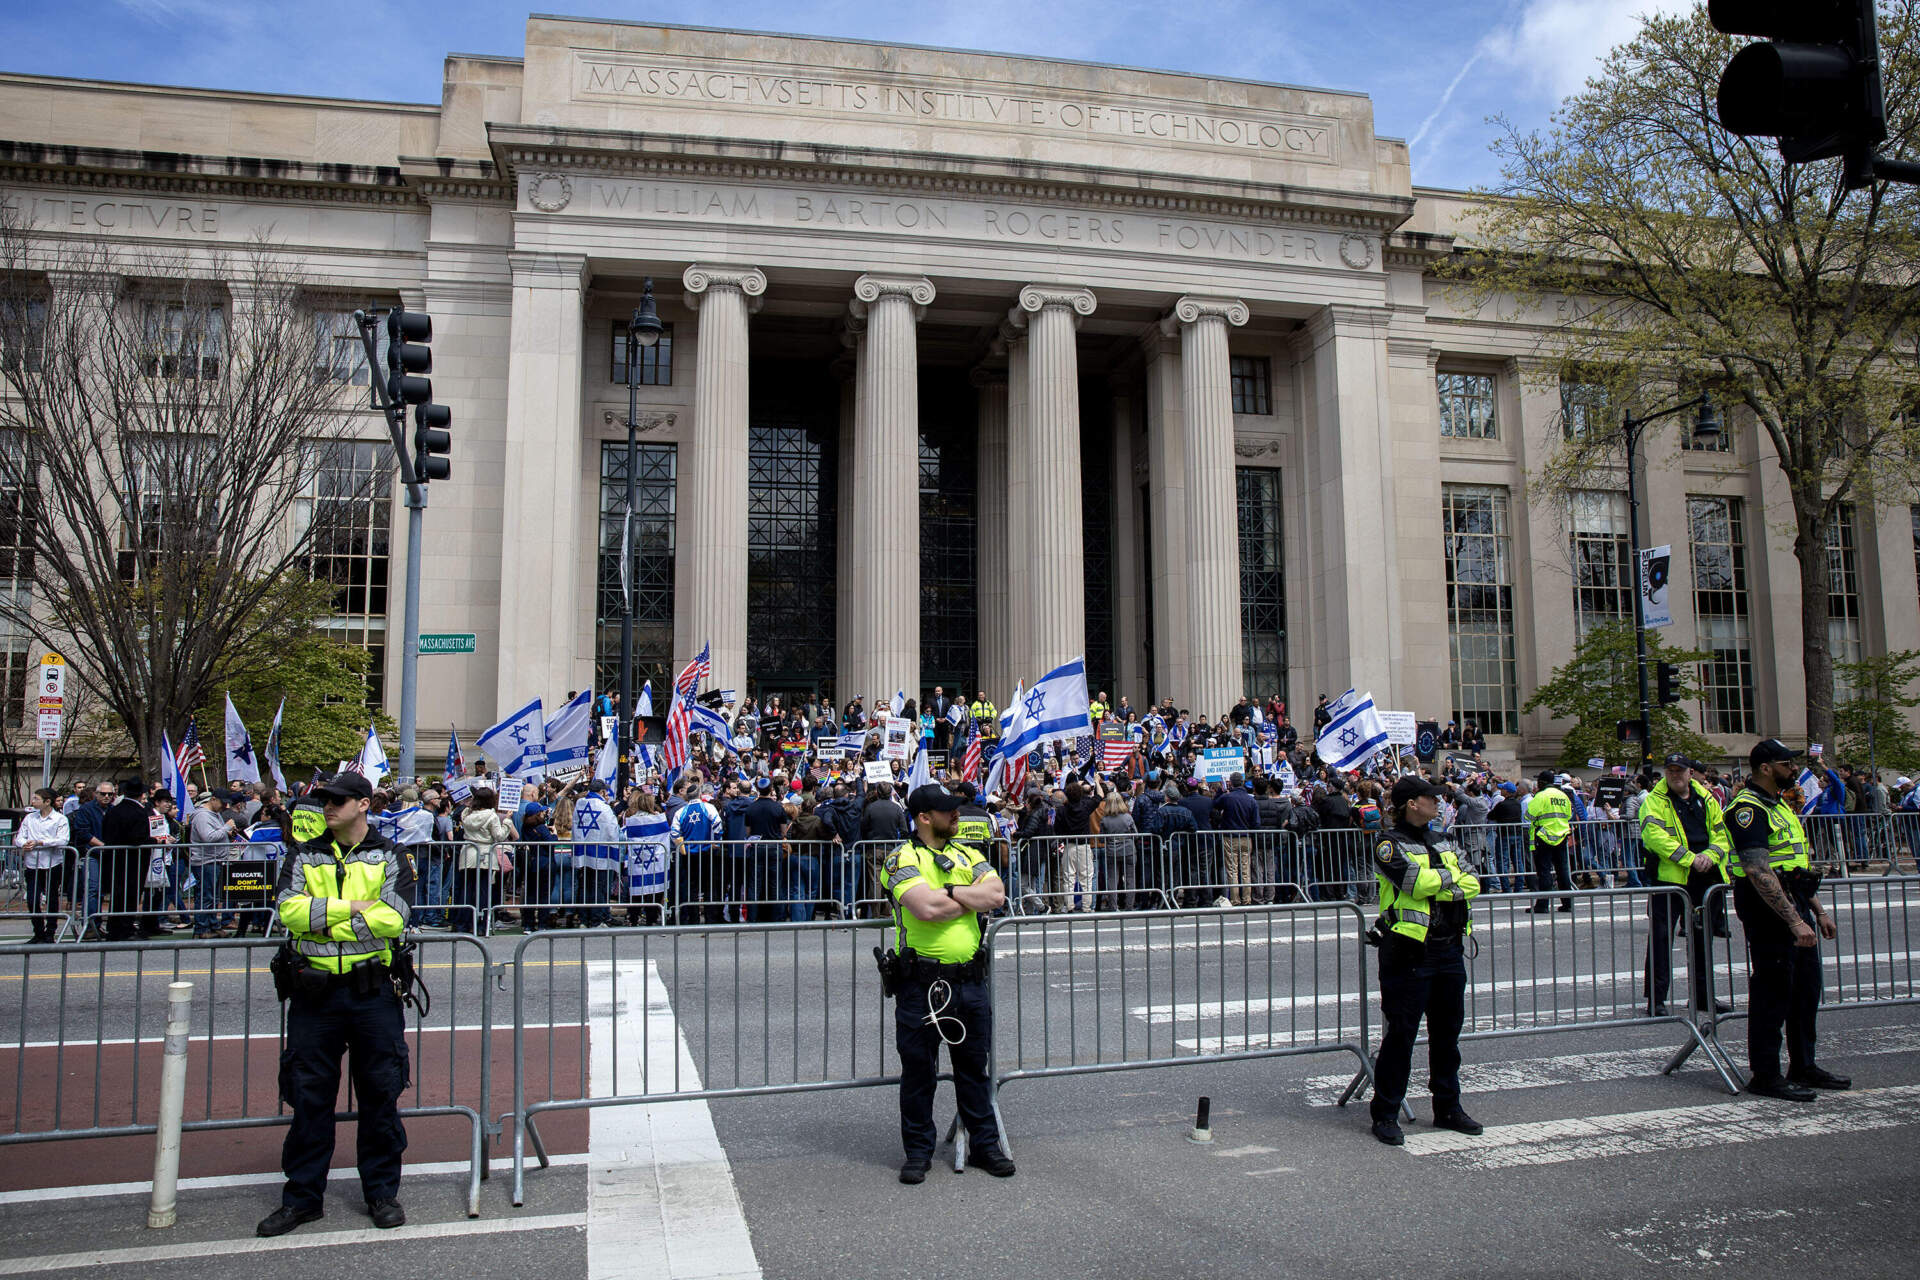 Demonstrators wave Israeli flags on the steps of MIT at rally arranged by the New England chapter of the Israeli American Council. (Robin Lubbock/WBUR)